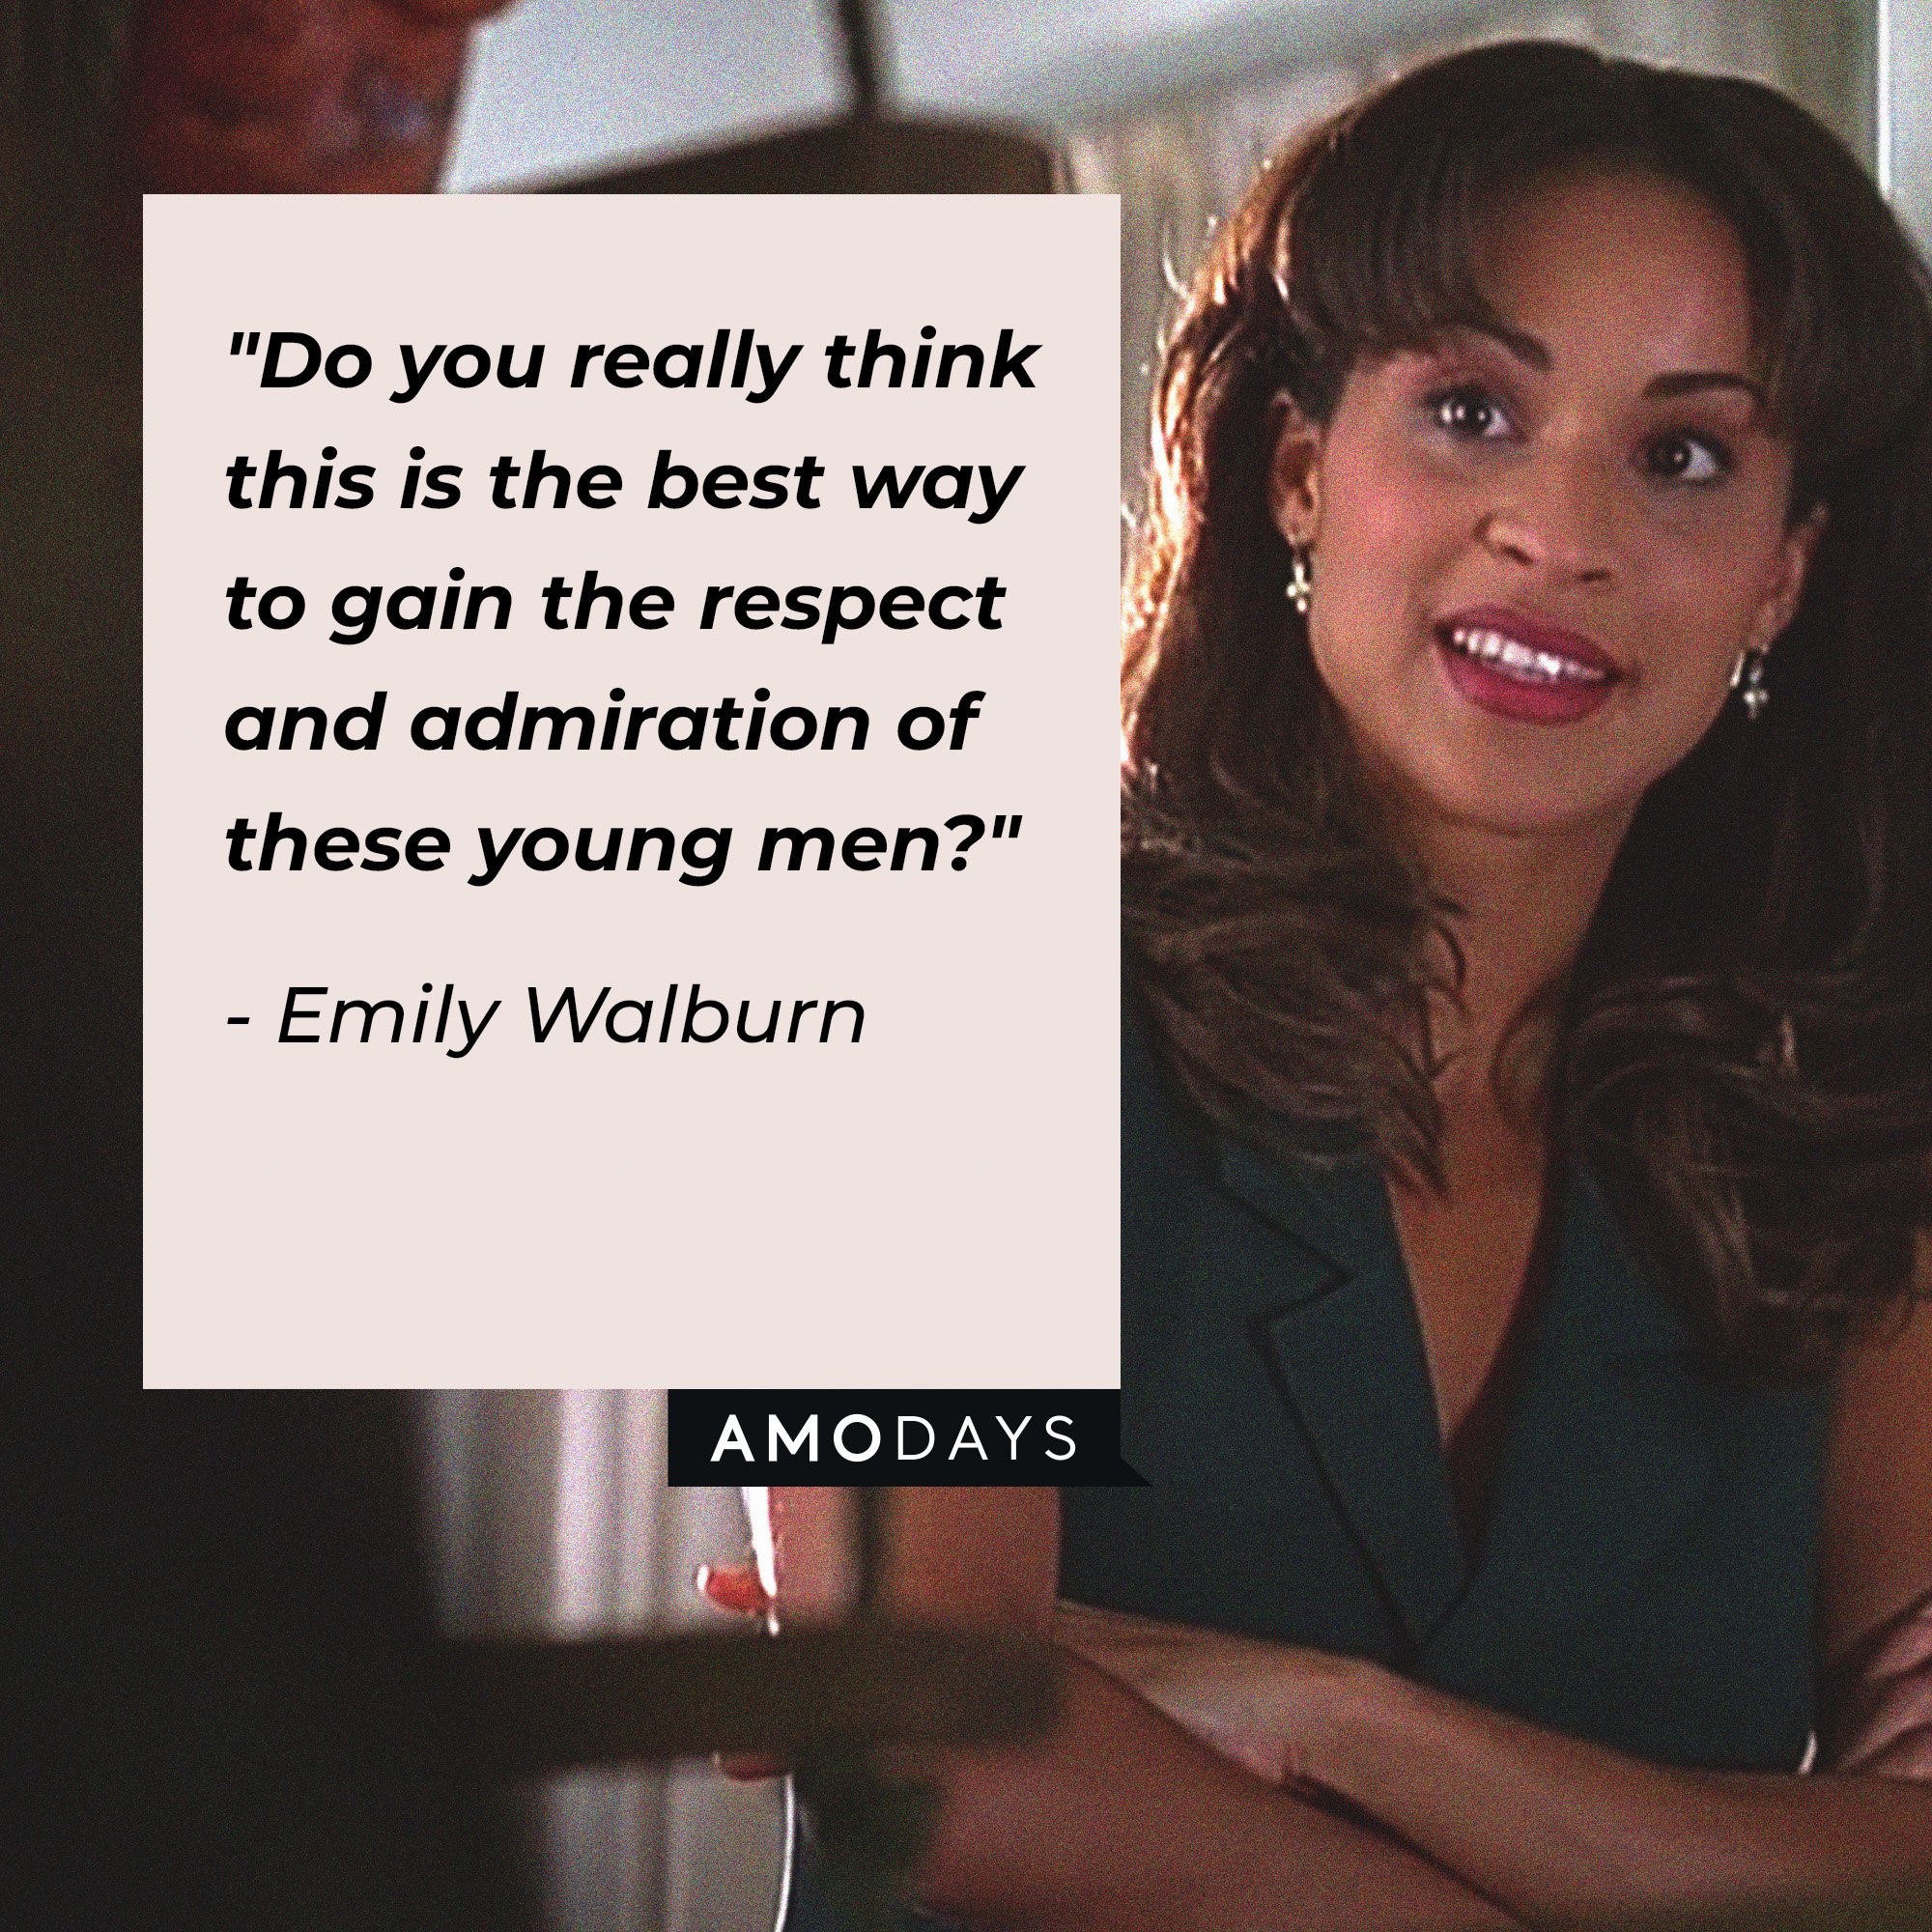 Emily Walburn's quote: "Do you really think this is the best way to gain the respect and admiration of these young men?" | Source: Amodays